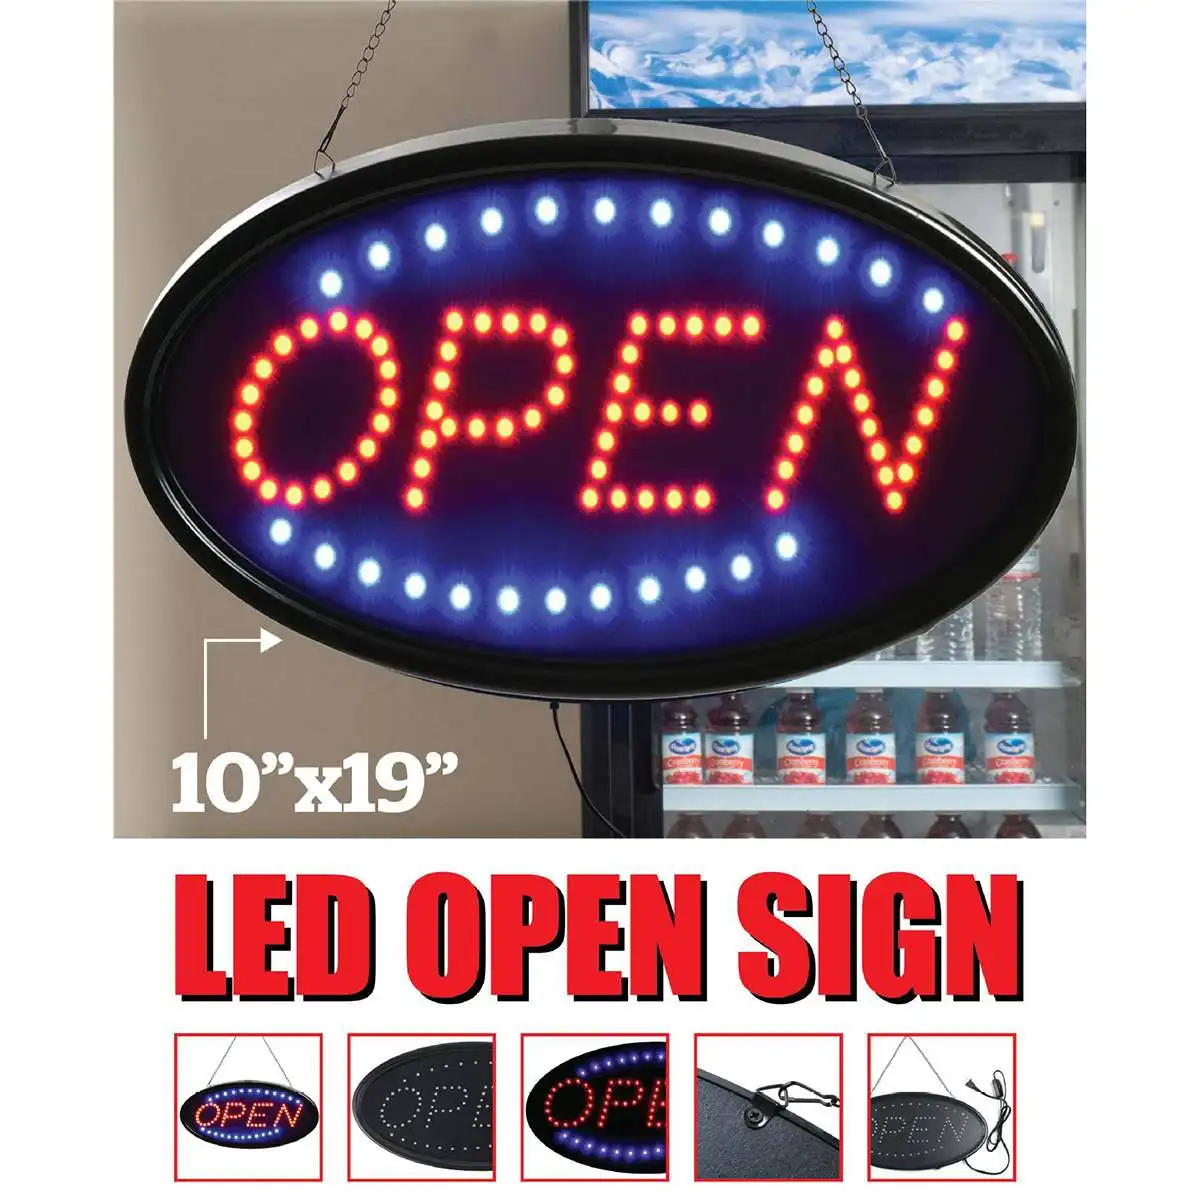 OPEN LED Neon Light Sign Shop Cafe Bar Pub Business Business Ultra Animated Top 